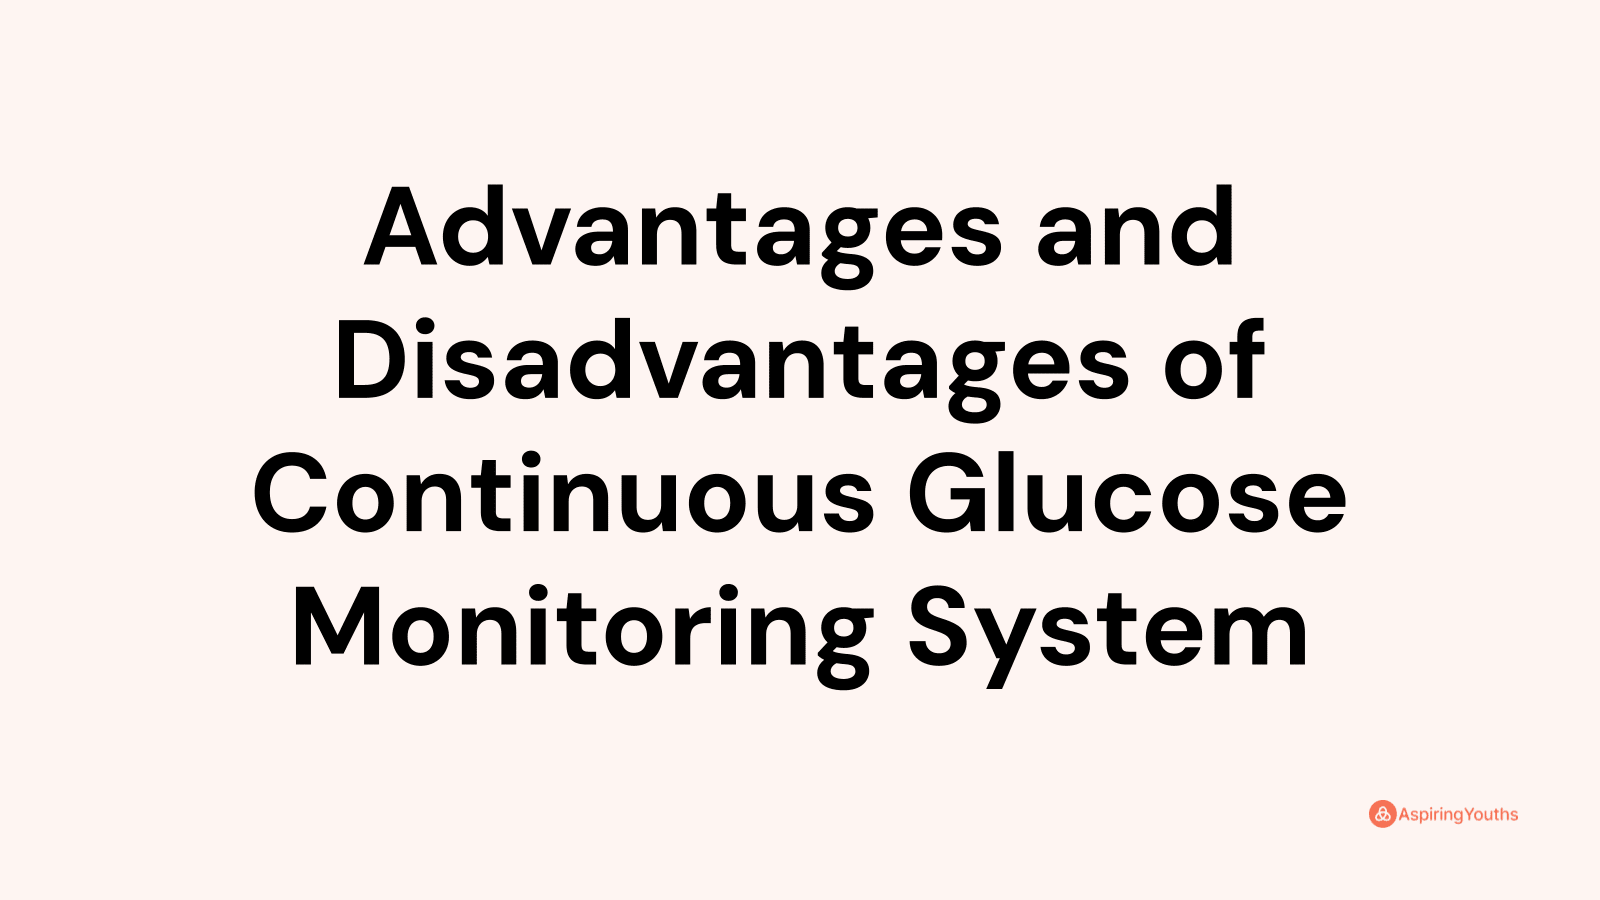 Advantages and disadvantages of Continuous Glucose Monitoring System